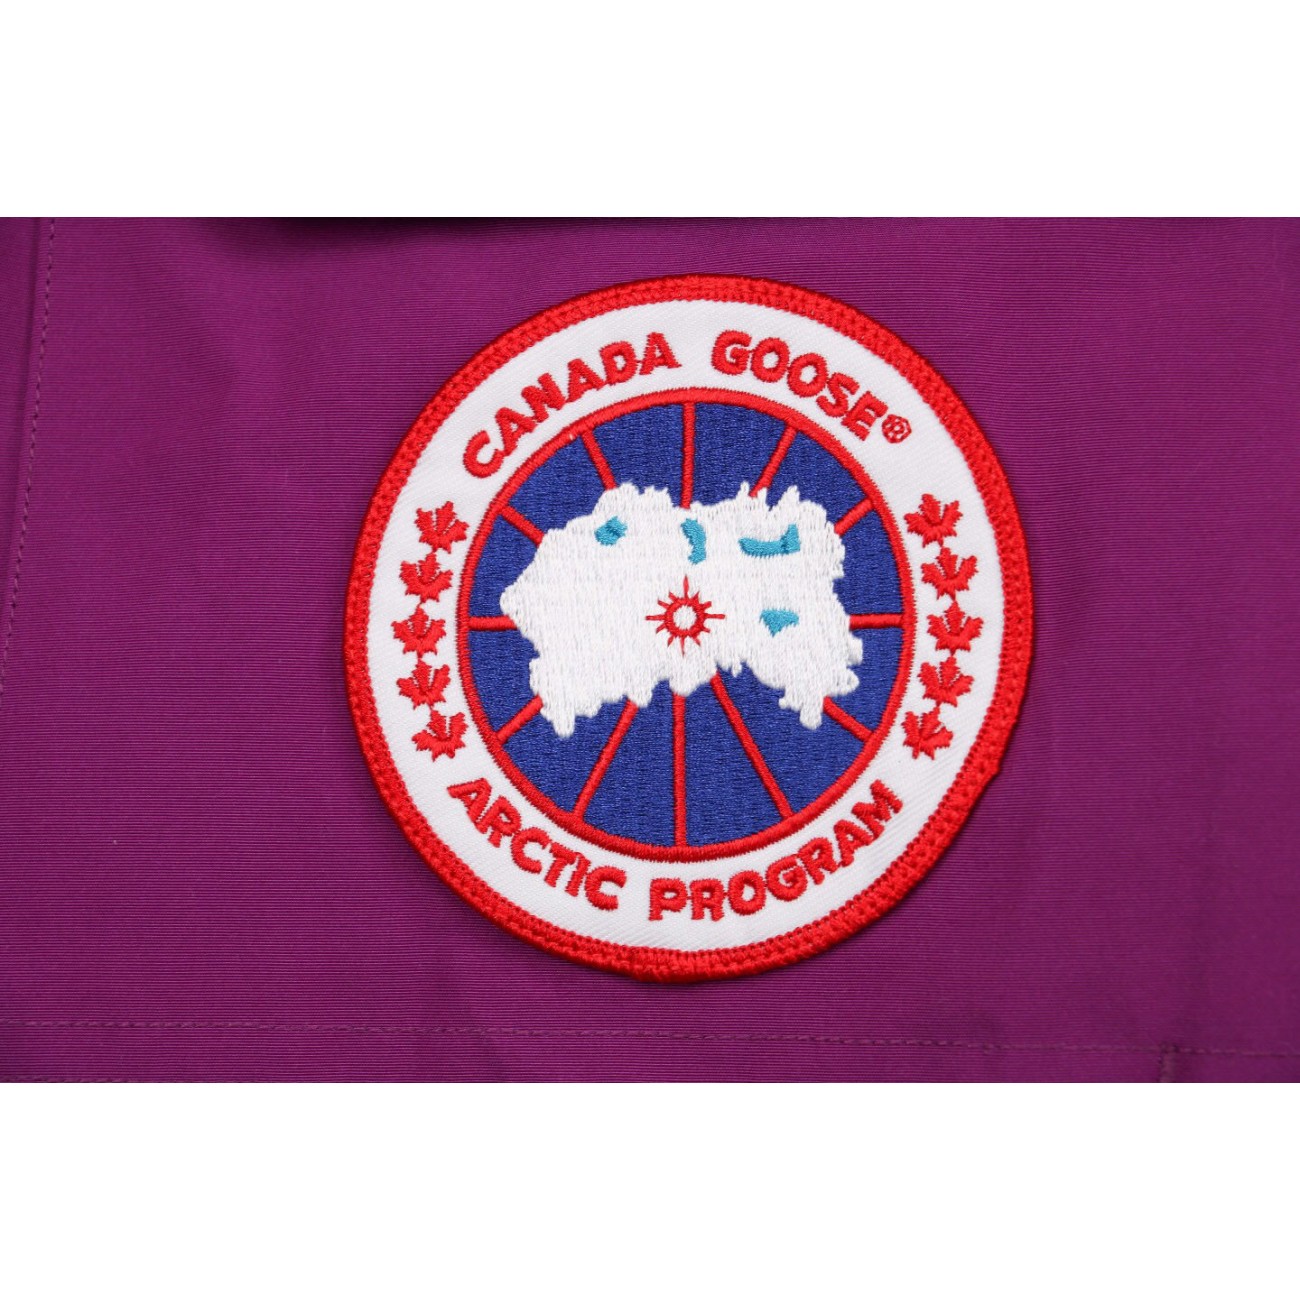 08 ' Canada Goose '19FW Expedition 4660MA Down Jacket Coat "Purple"